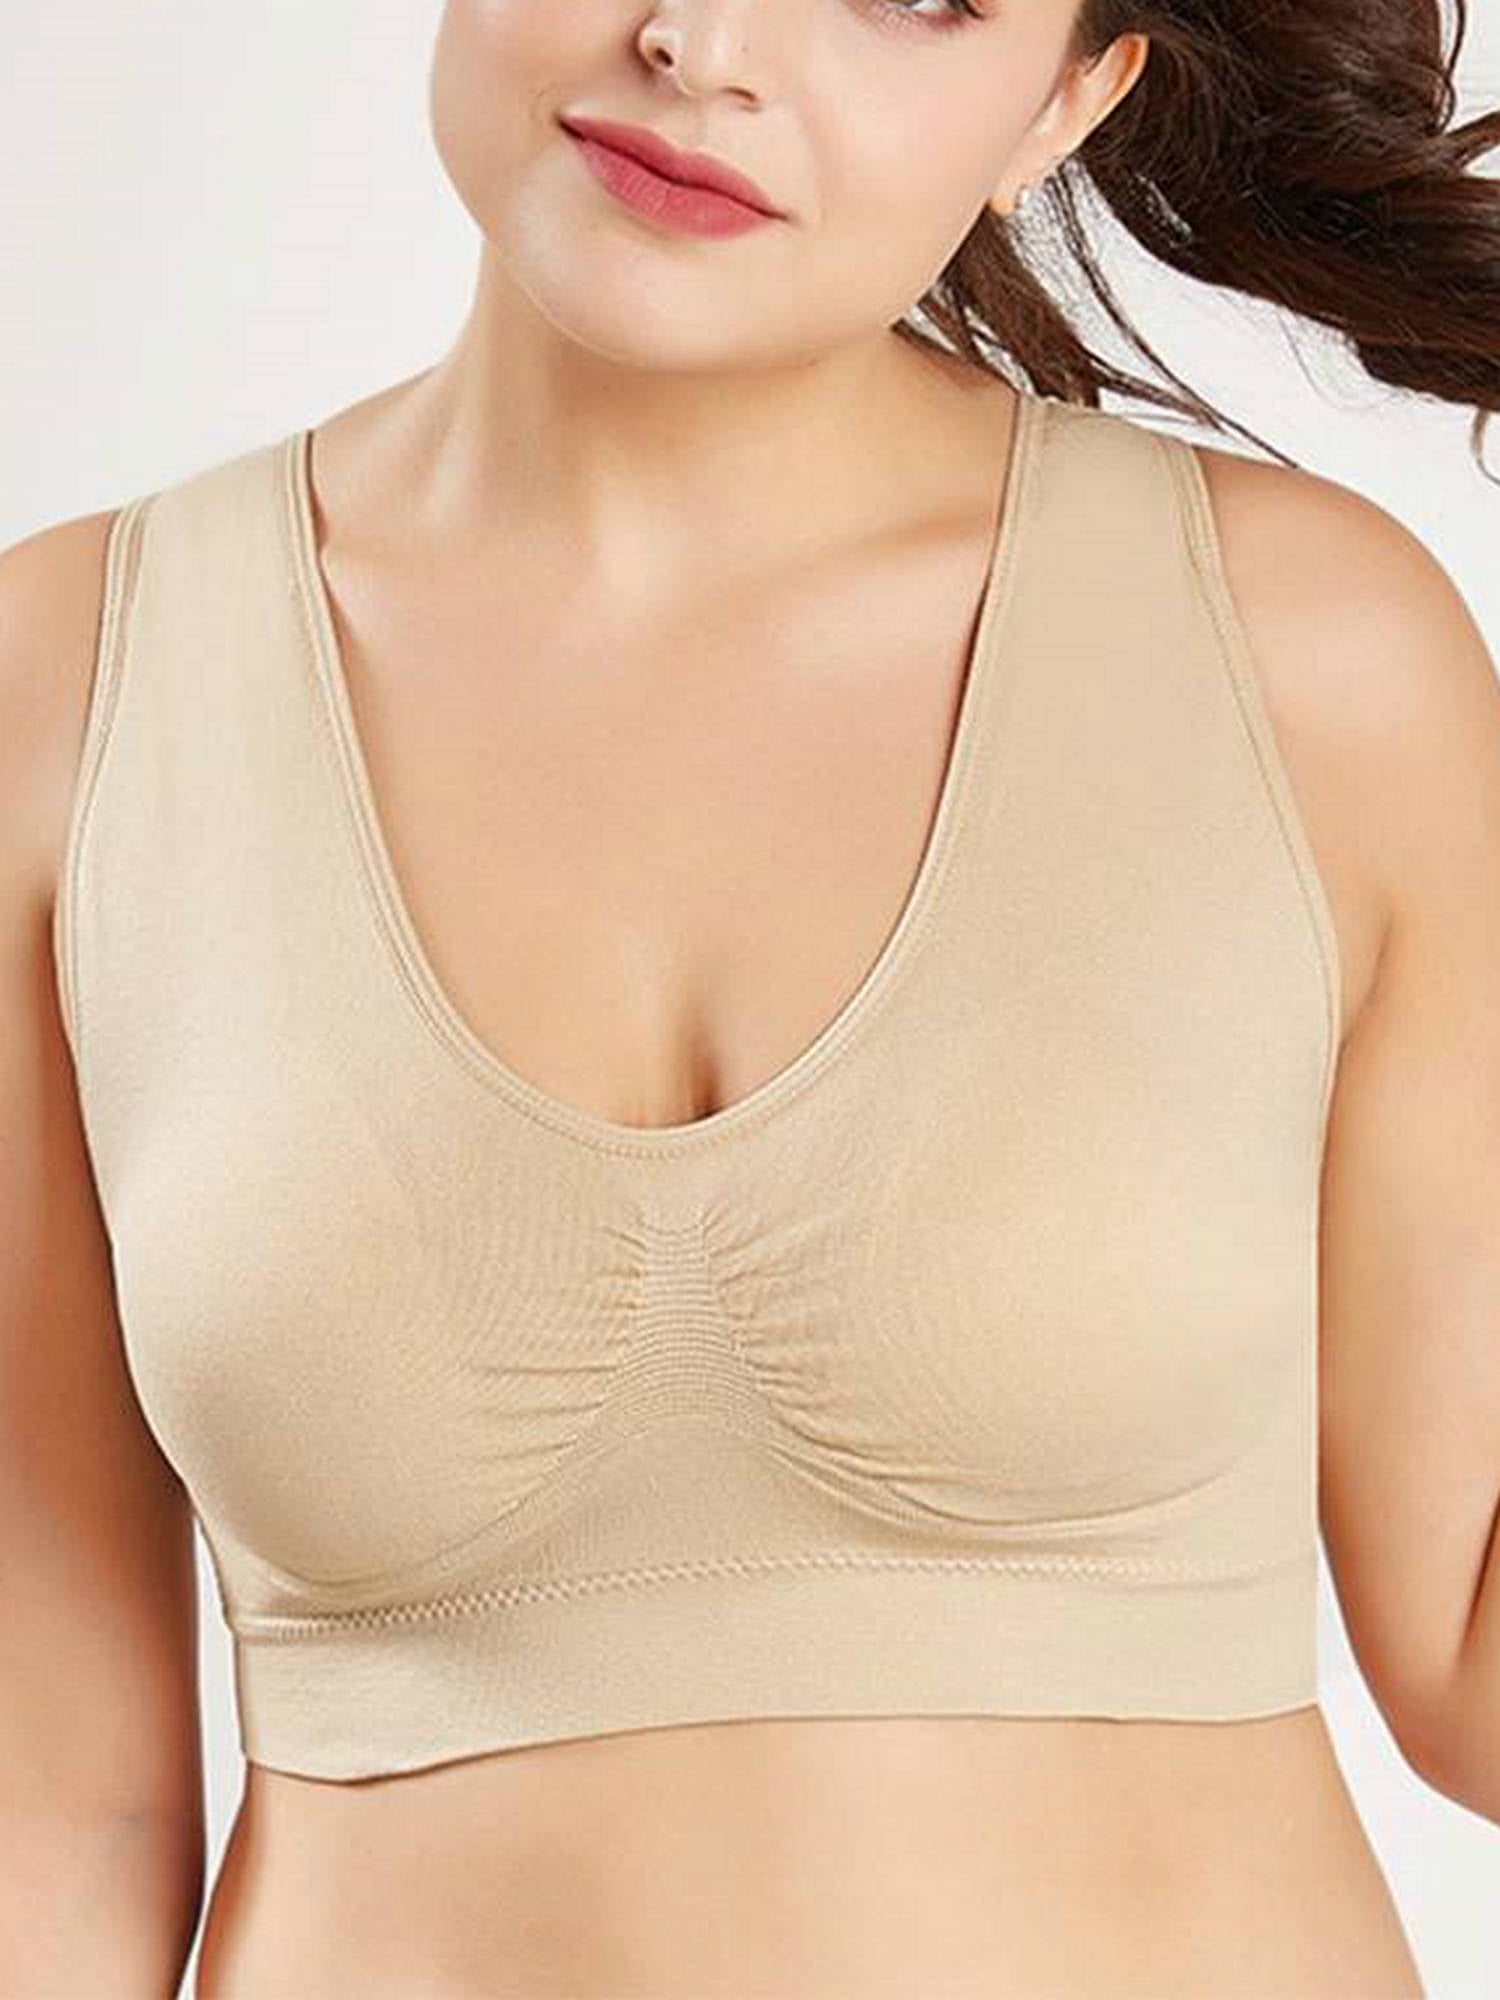 JustVH Women Seamless High Stretch Sports Casual Underwear Chest Pad Full  Cup Shockproof Quick-drying Bra 